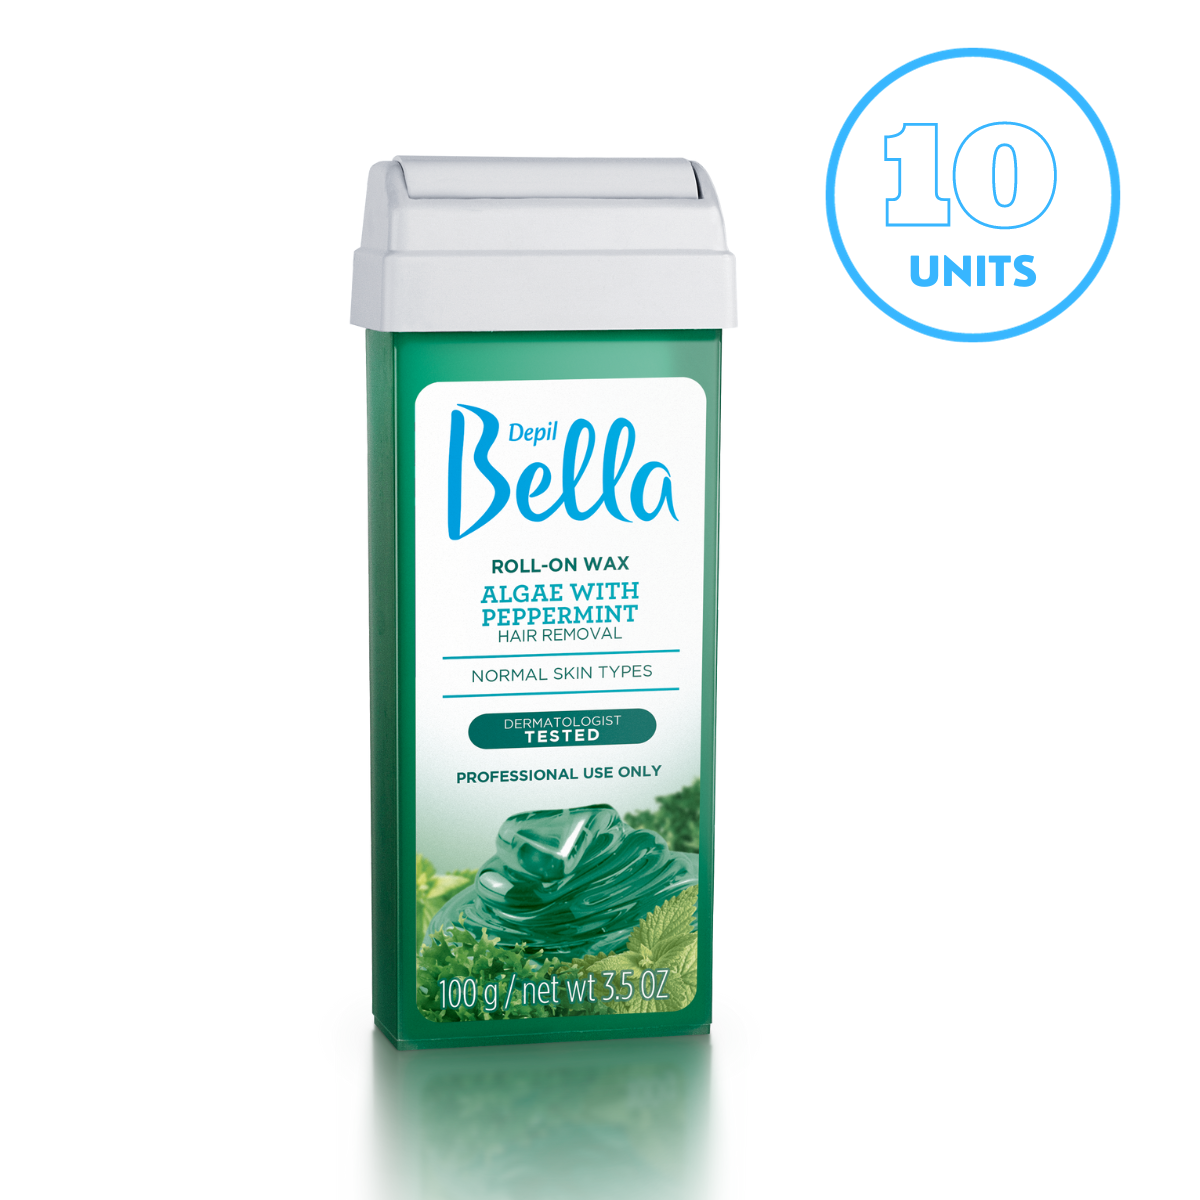 Depil Bella Algae with Peppermint Roll-On Depilatory Wax, 3.52oz (10 Units Offer) - Buy professional cosmetics dedicated to hair removal